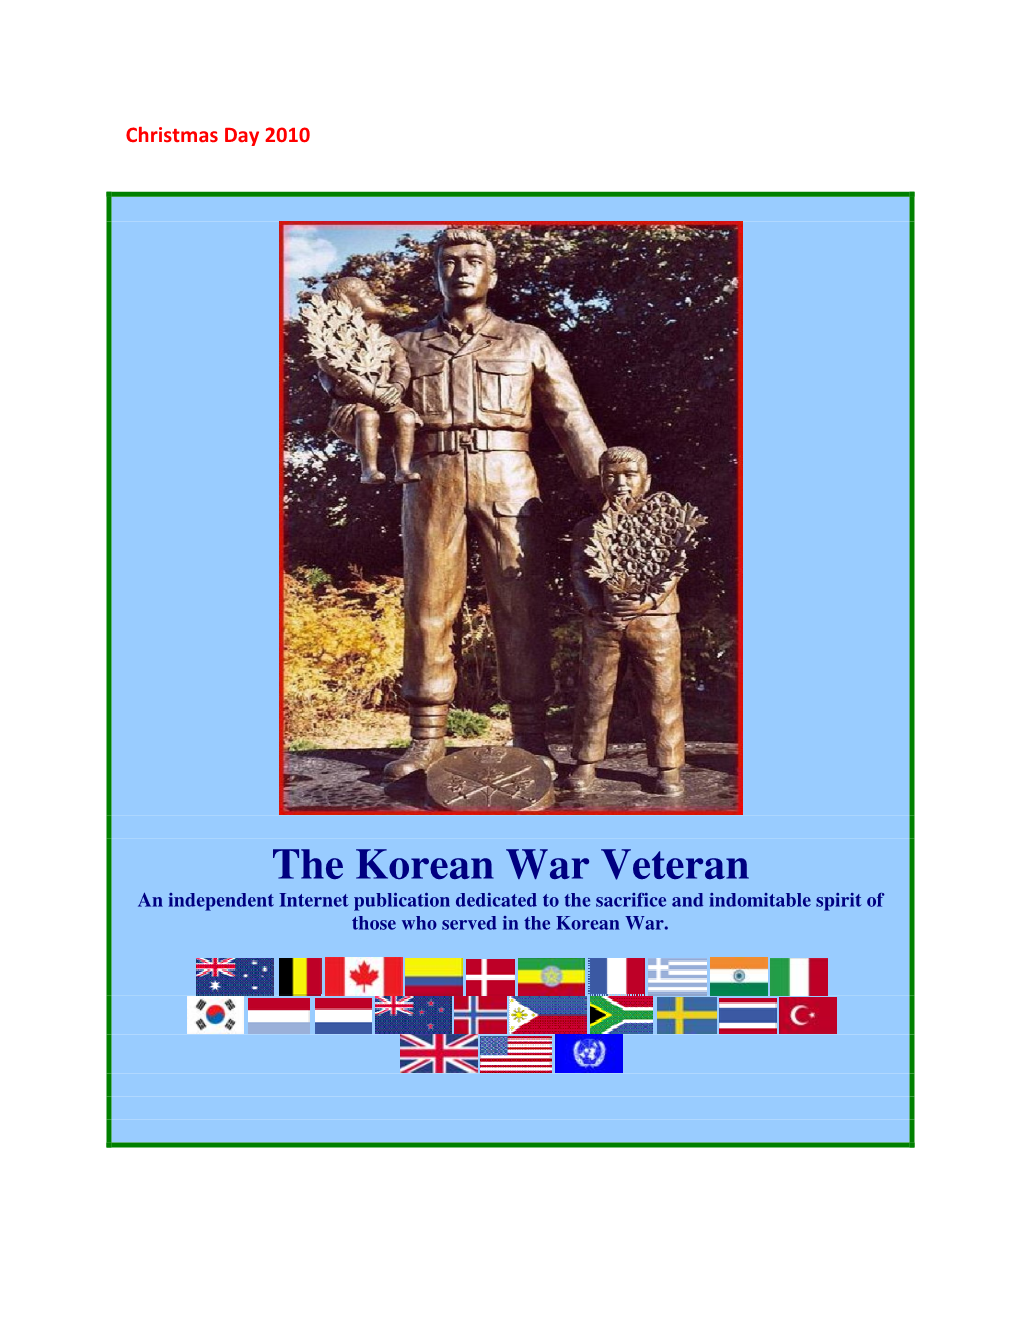 The Korean War Veteran an Independent Internet Publication Dedicated to the Sacrifice and Indomitable Spirit of Those Who Served in the Korean War